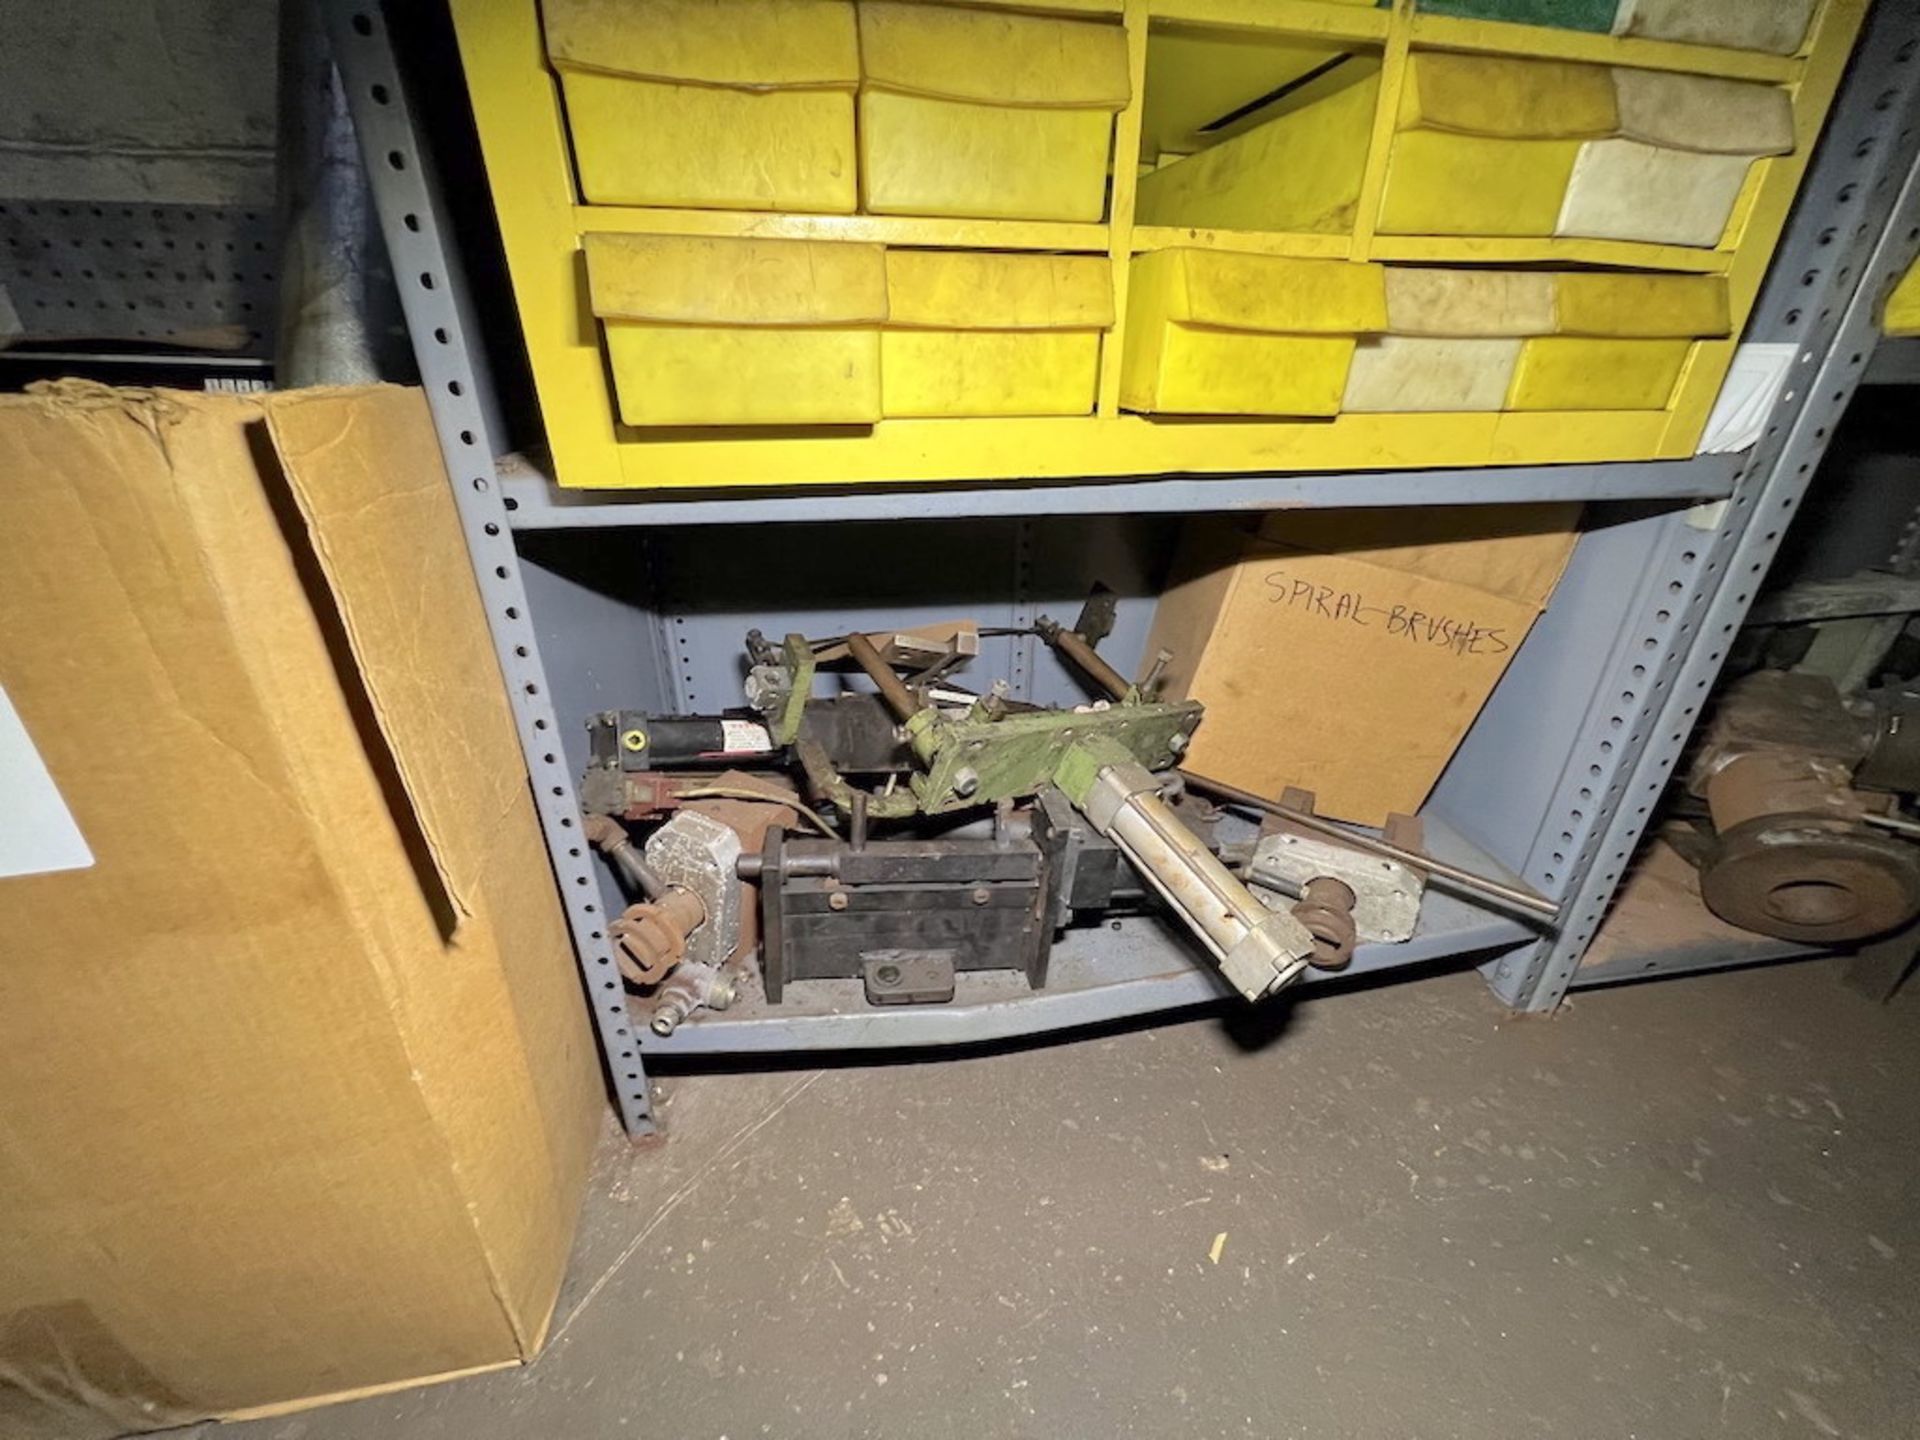 Remaining Contents of Parts Room - Image 28 of 60